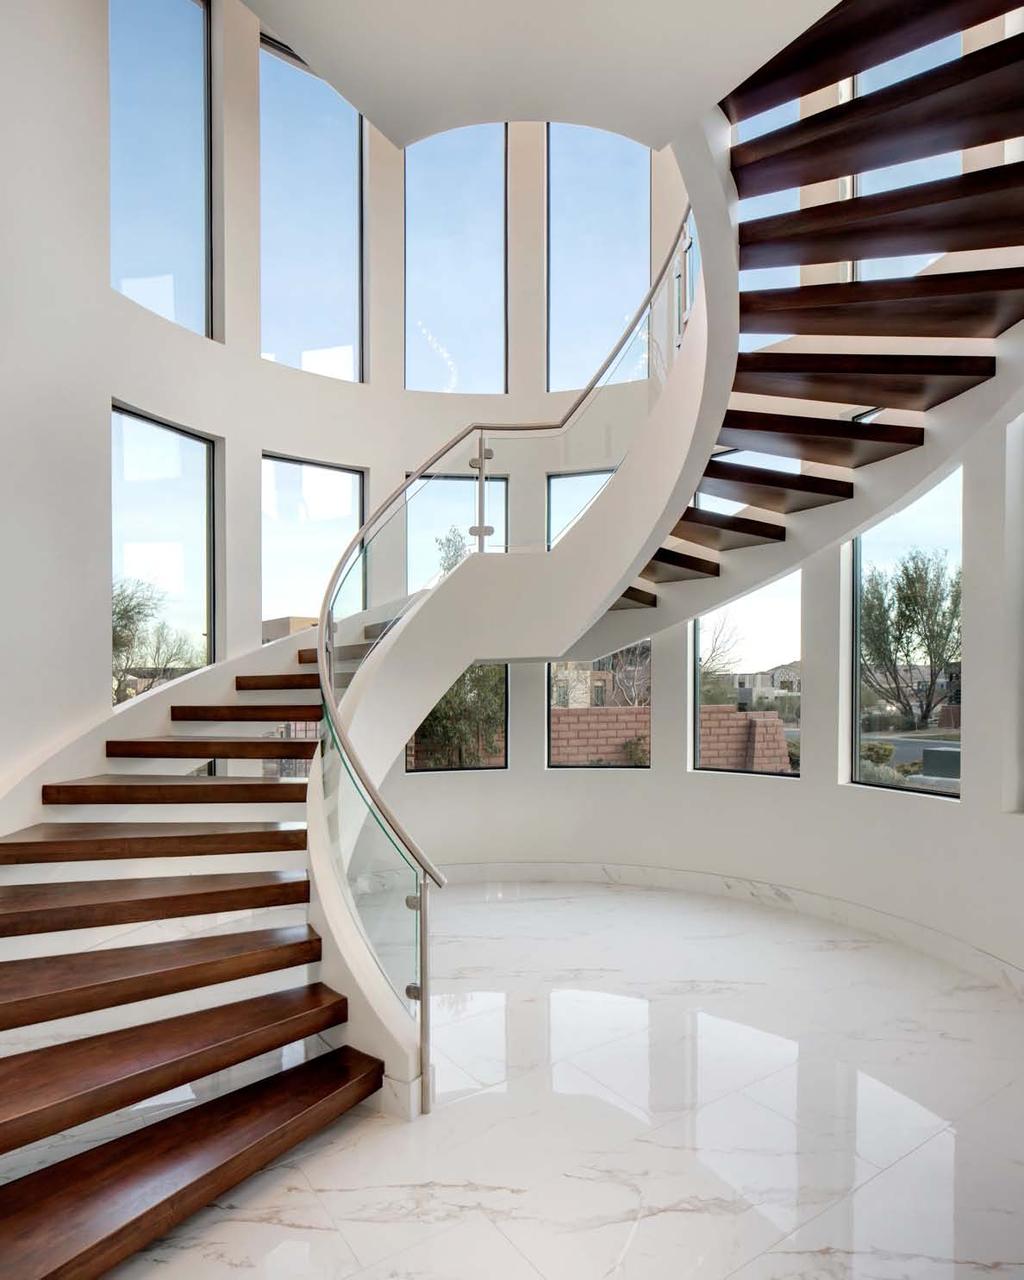 2018 StairCraft Awards Aesthetic value: This is a laminated free floating stairway with open risers and solid maple steps wrapped all sides.